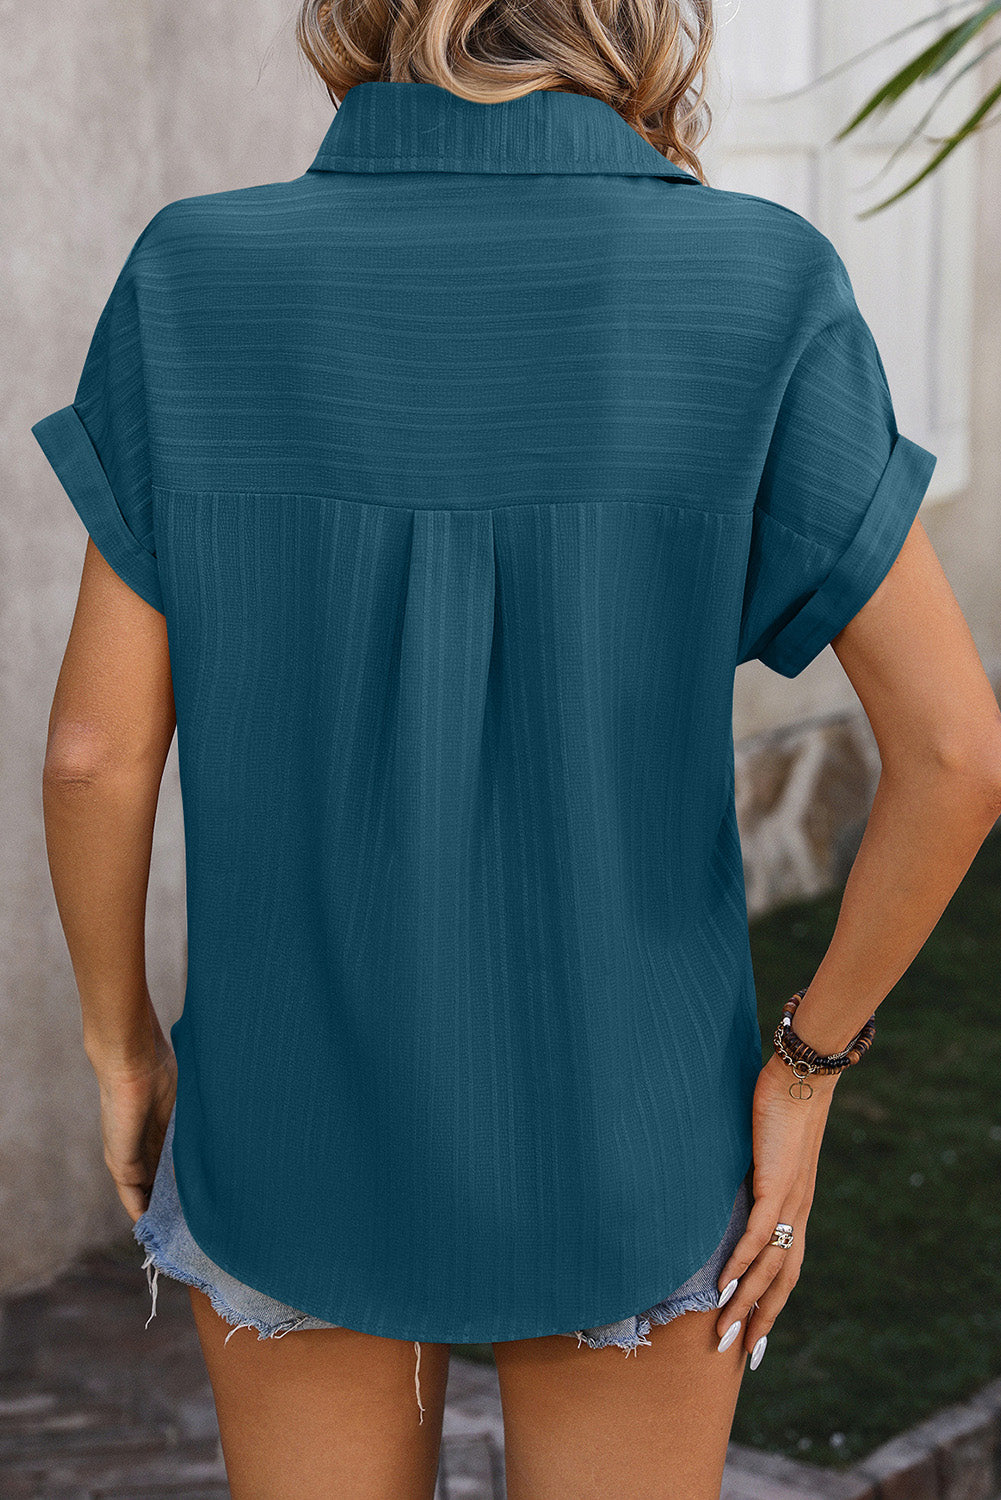 Real Teal Striped Texture Cuffed Short Sleeve Shirt